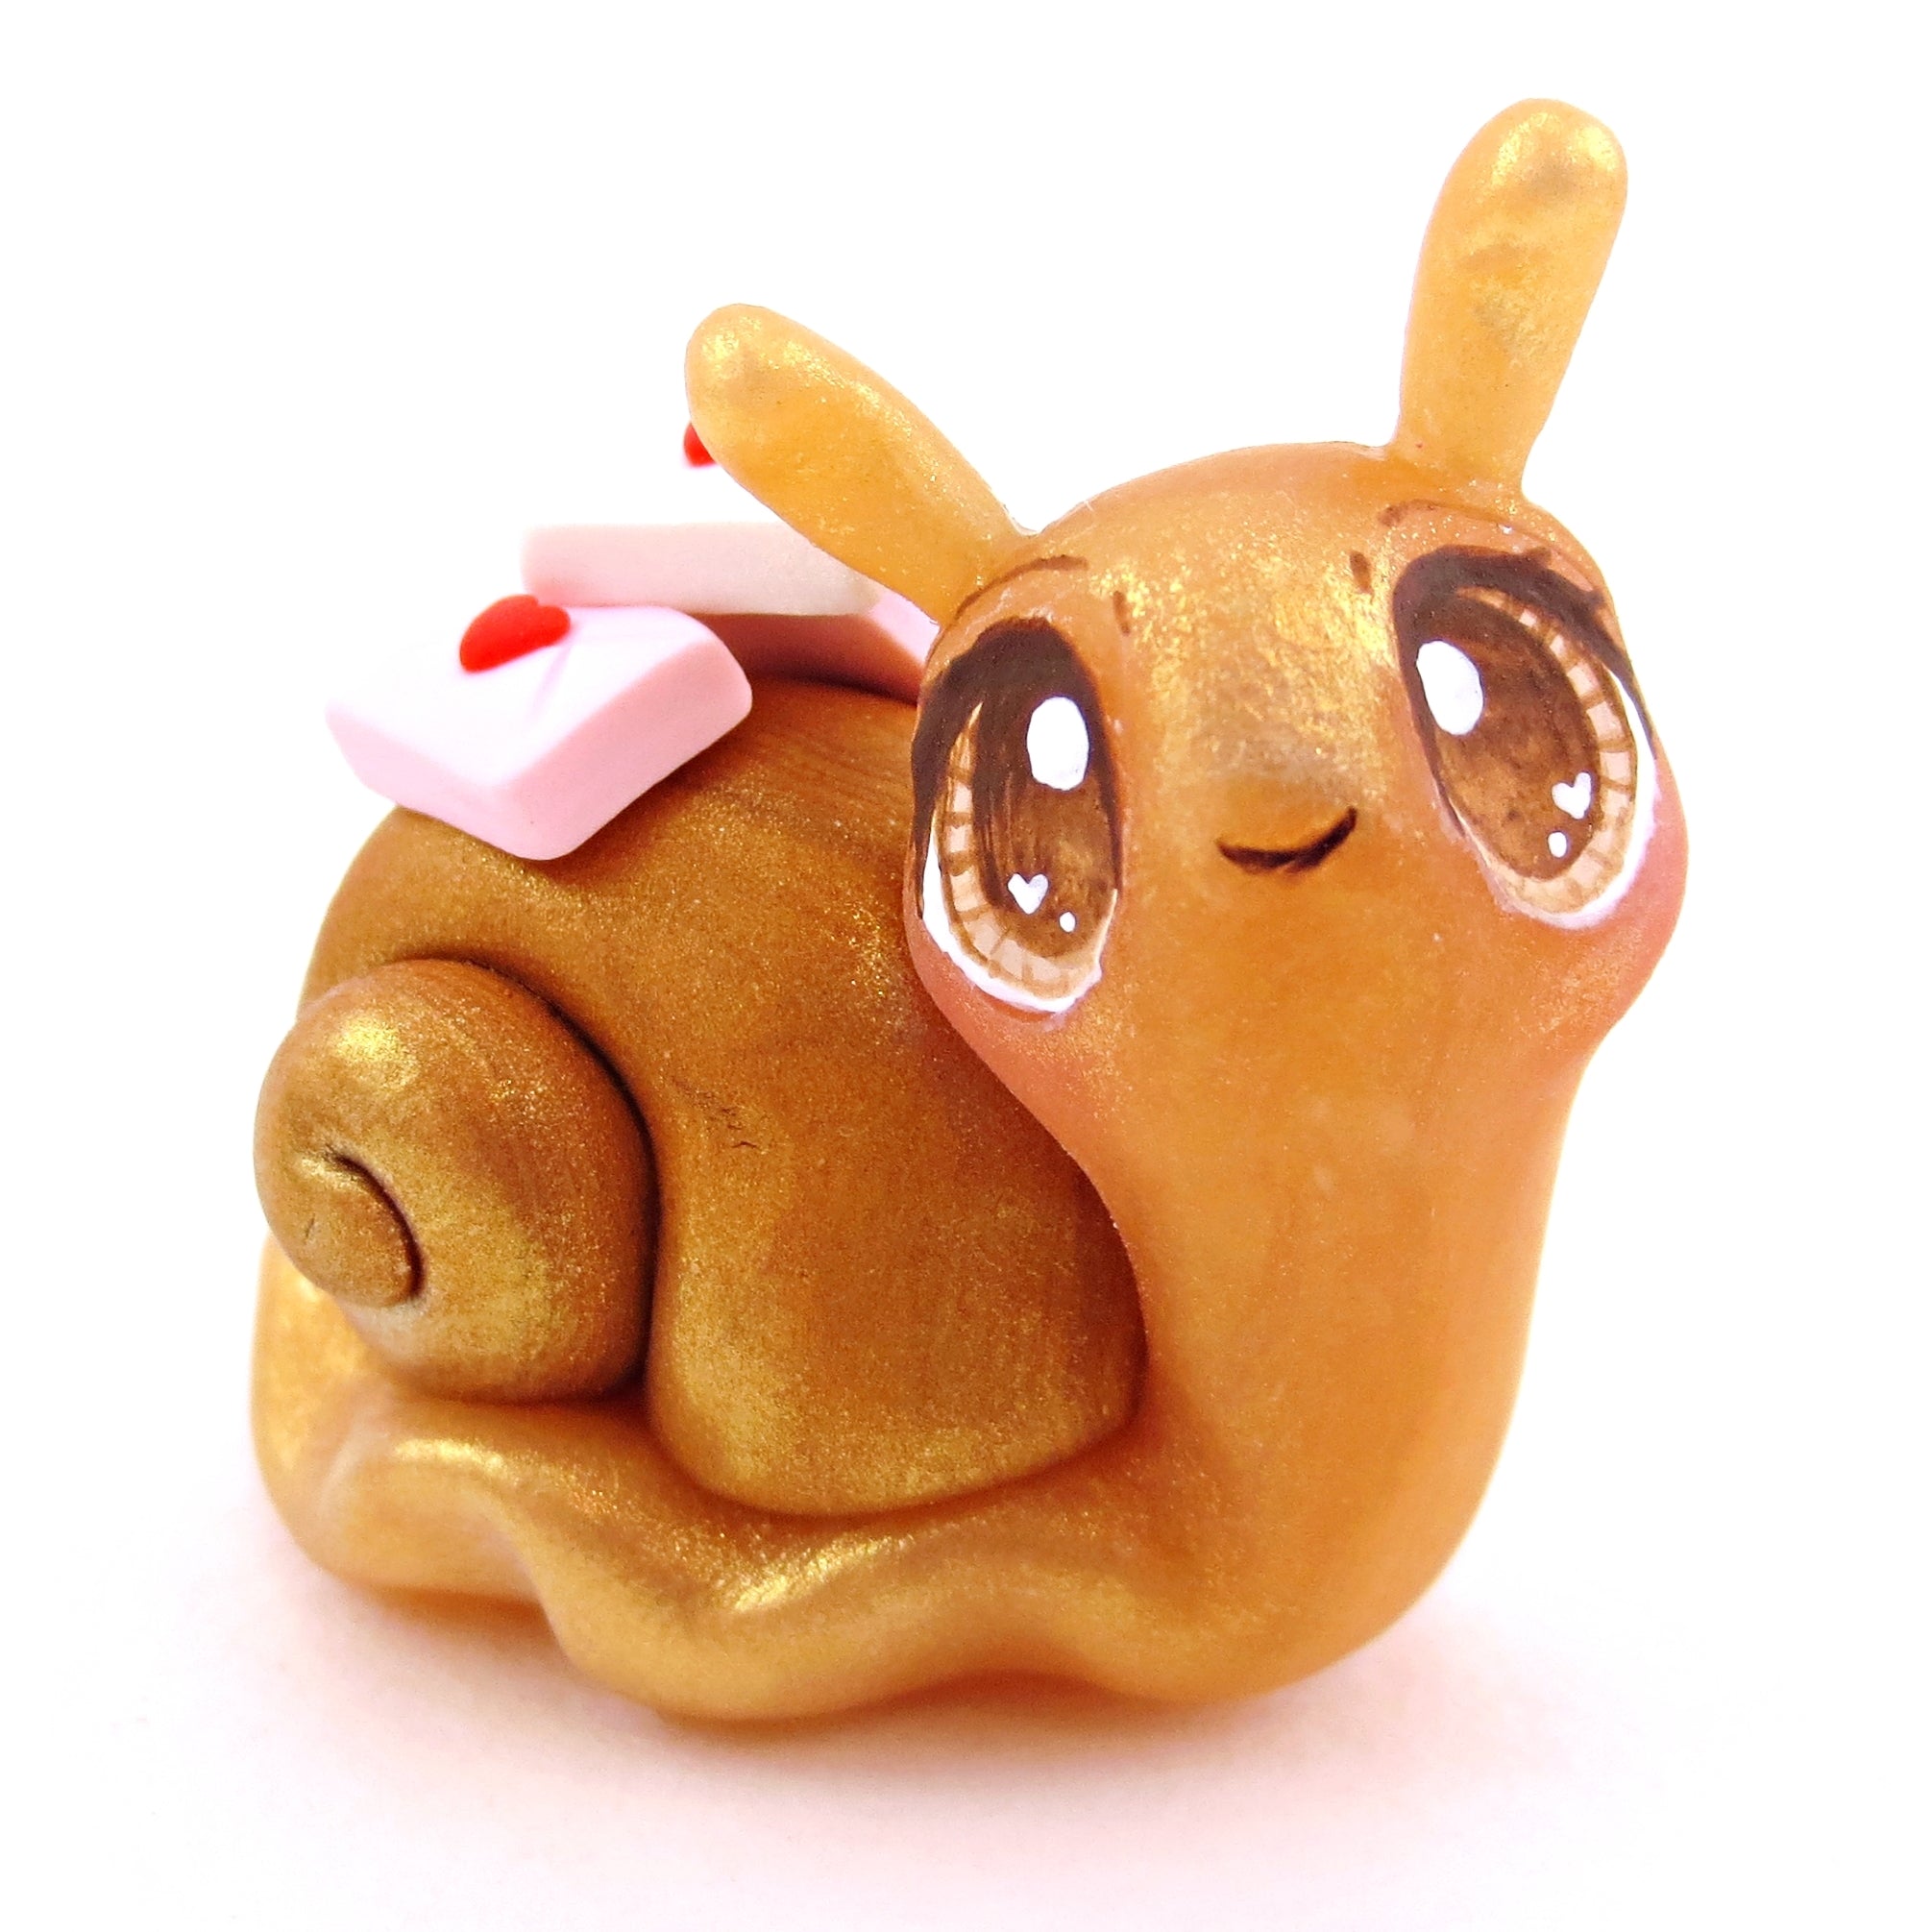 "Snail Mail" Letter Carrier Snail with Brown Eyes Figurine - Polymer Clay Valentine's Day Animal Collection